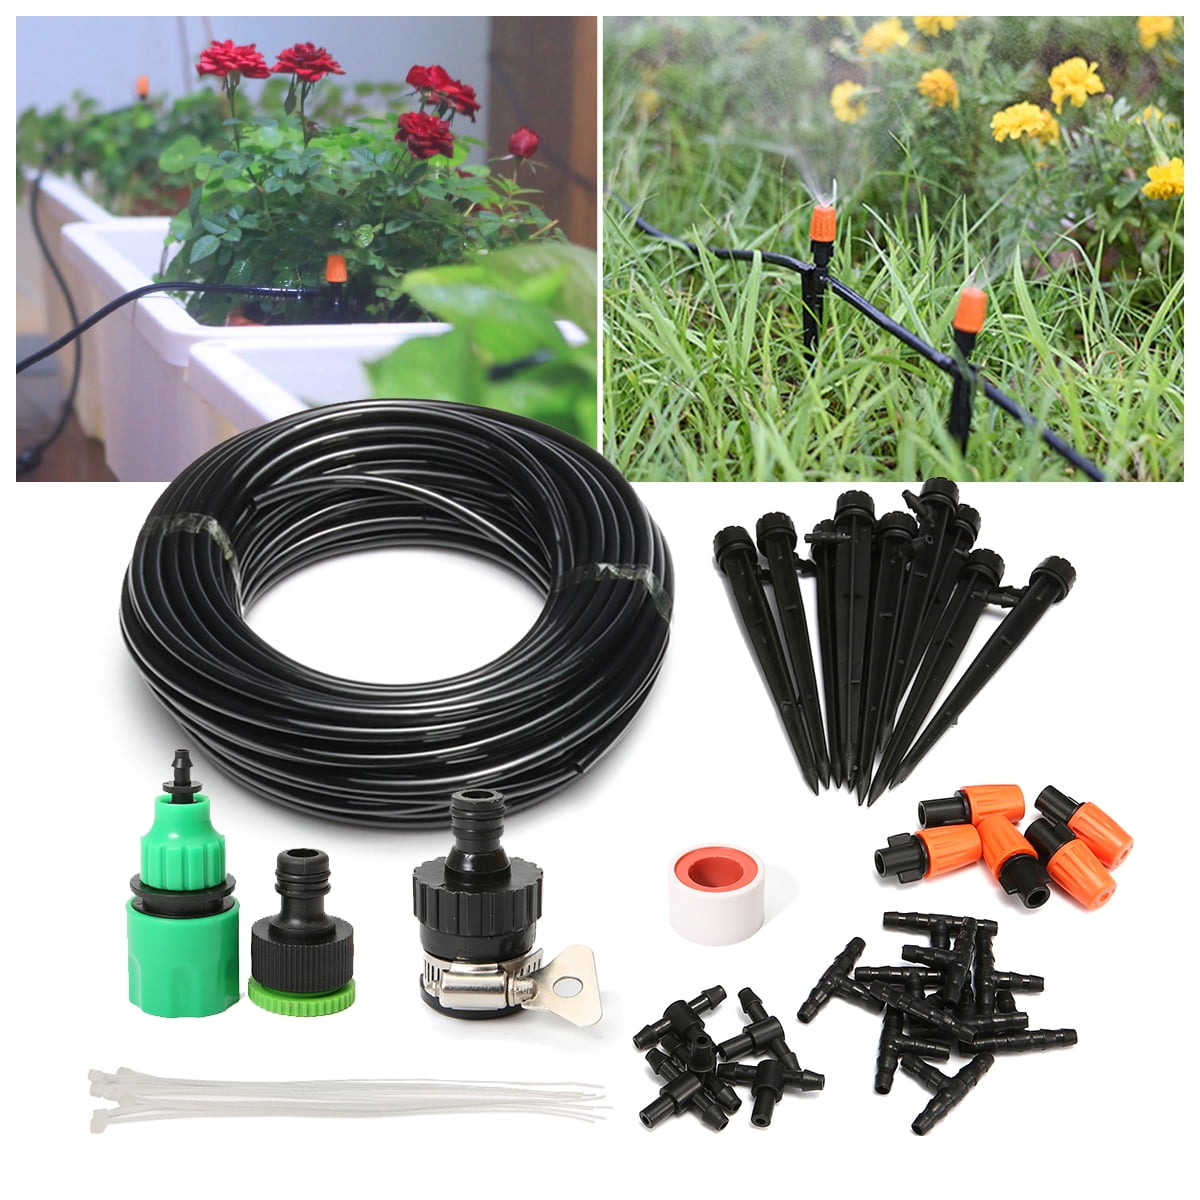 Pack of 50 Greenhouse Drip Irrigation Kit Support Stakes for 1/4-Inch Tubing Hose Holder Drip Support Stakes For Vegetable Garden Flower Beds Herbs 